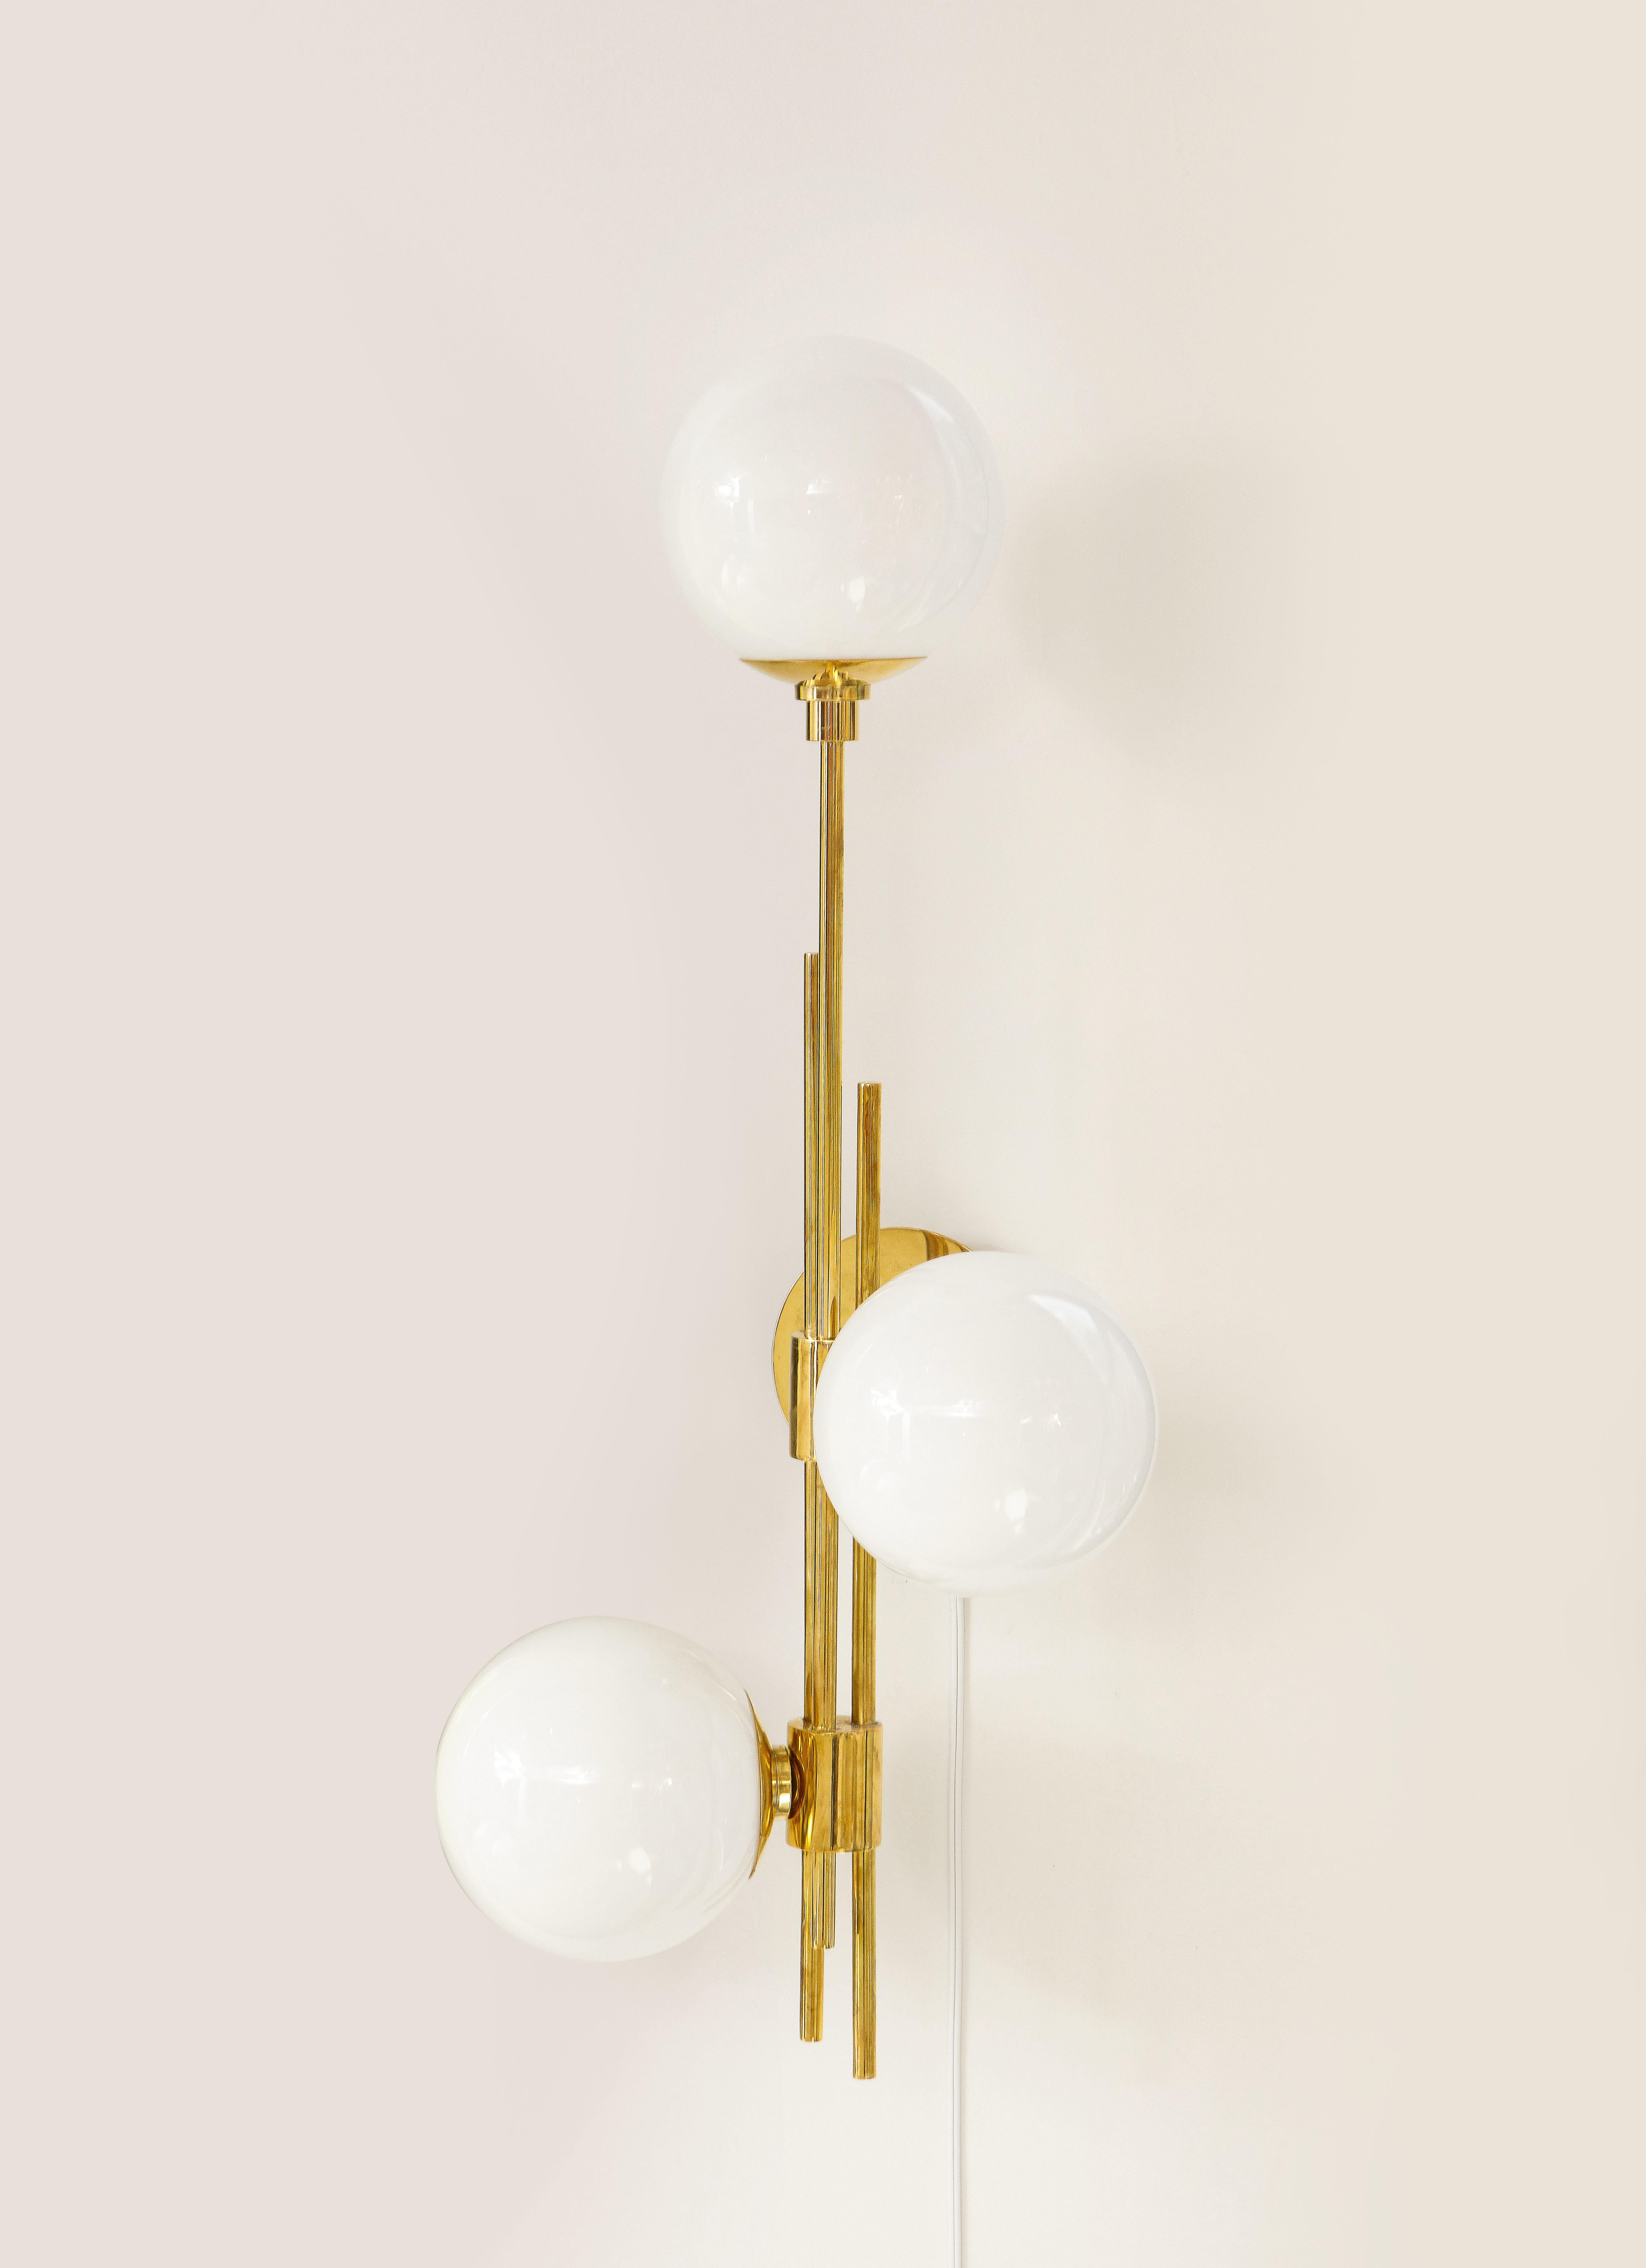 Pair of translucent white murano glass globes and brass sconces handcrafted in Italy, 2022. Clean lines describe this pair of linear sconces, consisting of three (3) translucent white glass globes at different heights attached to polished brass